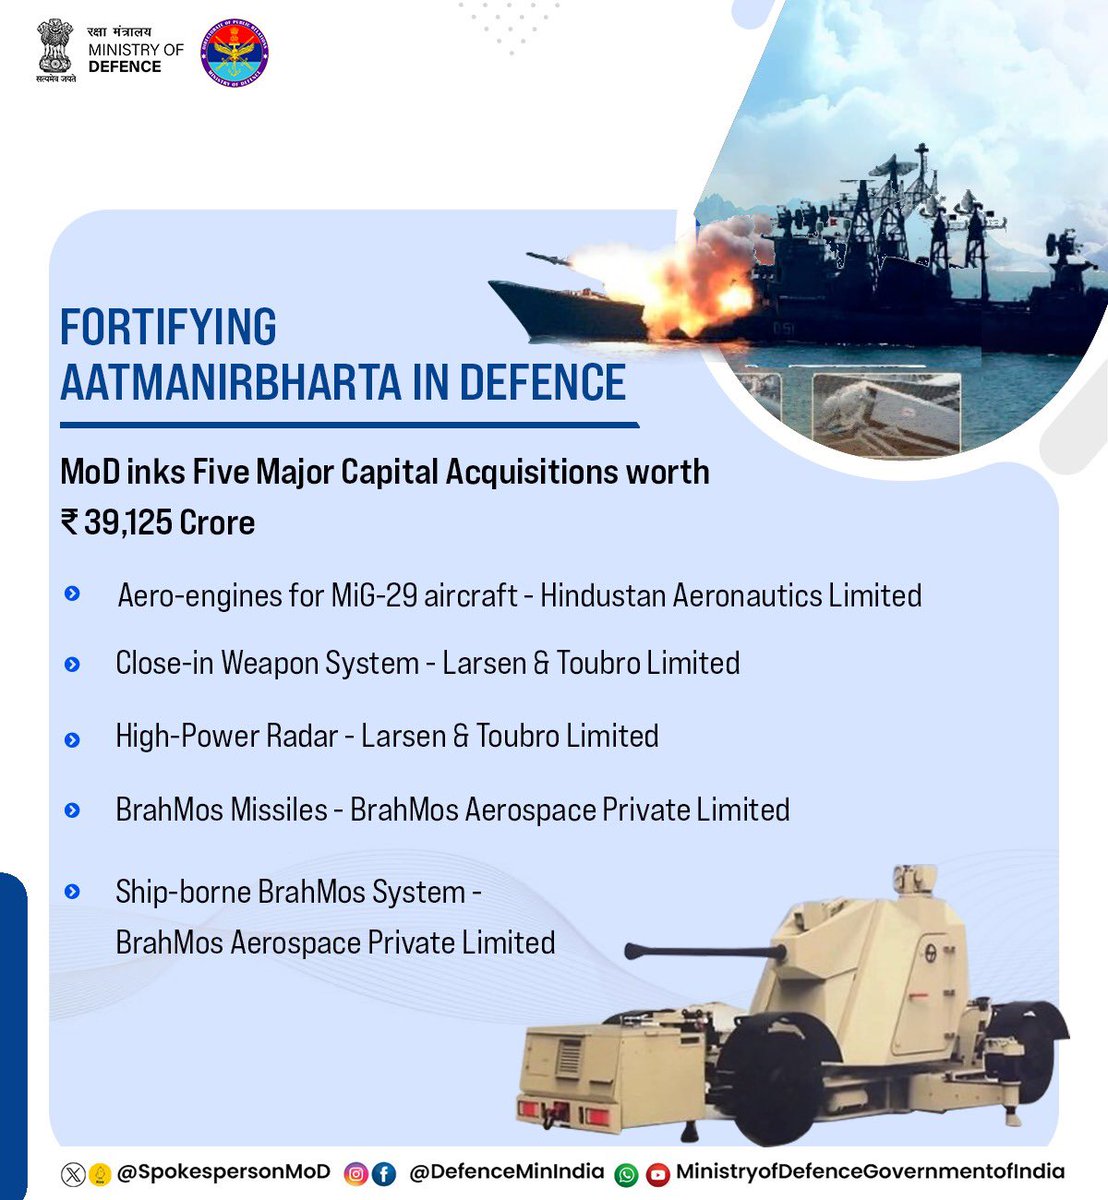 Indian #MoD signs five major capital acquisition #contracts worth INR 39,125 Cr in the presence of India's Defense Minister & Secretary 1. Mig-29 Aero Engine 2. CiWS 3. Radar 4. #Brahmos_Missile 5. BMS ship based #AATMANIRBHARTA